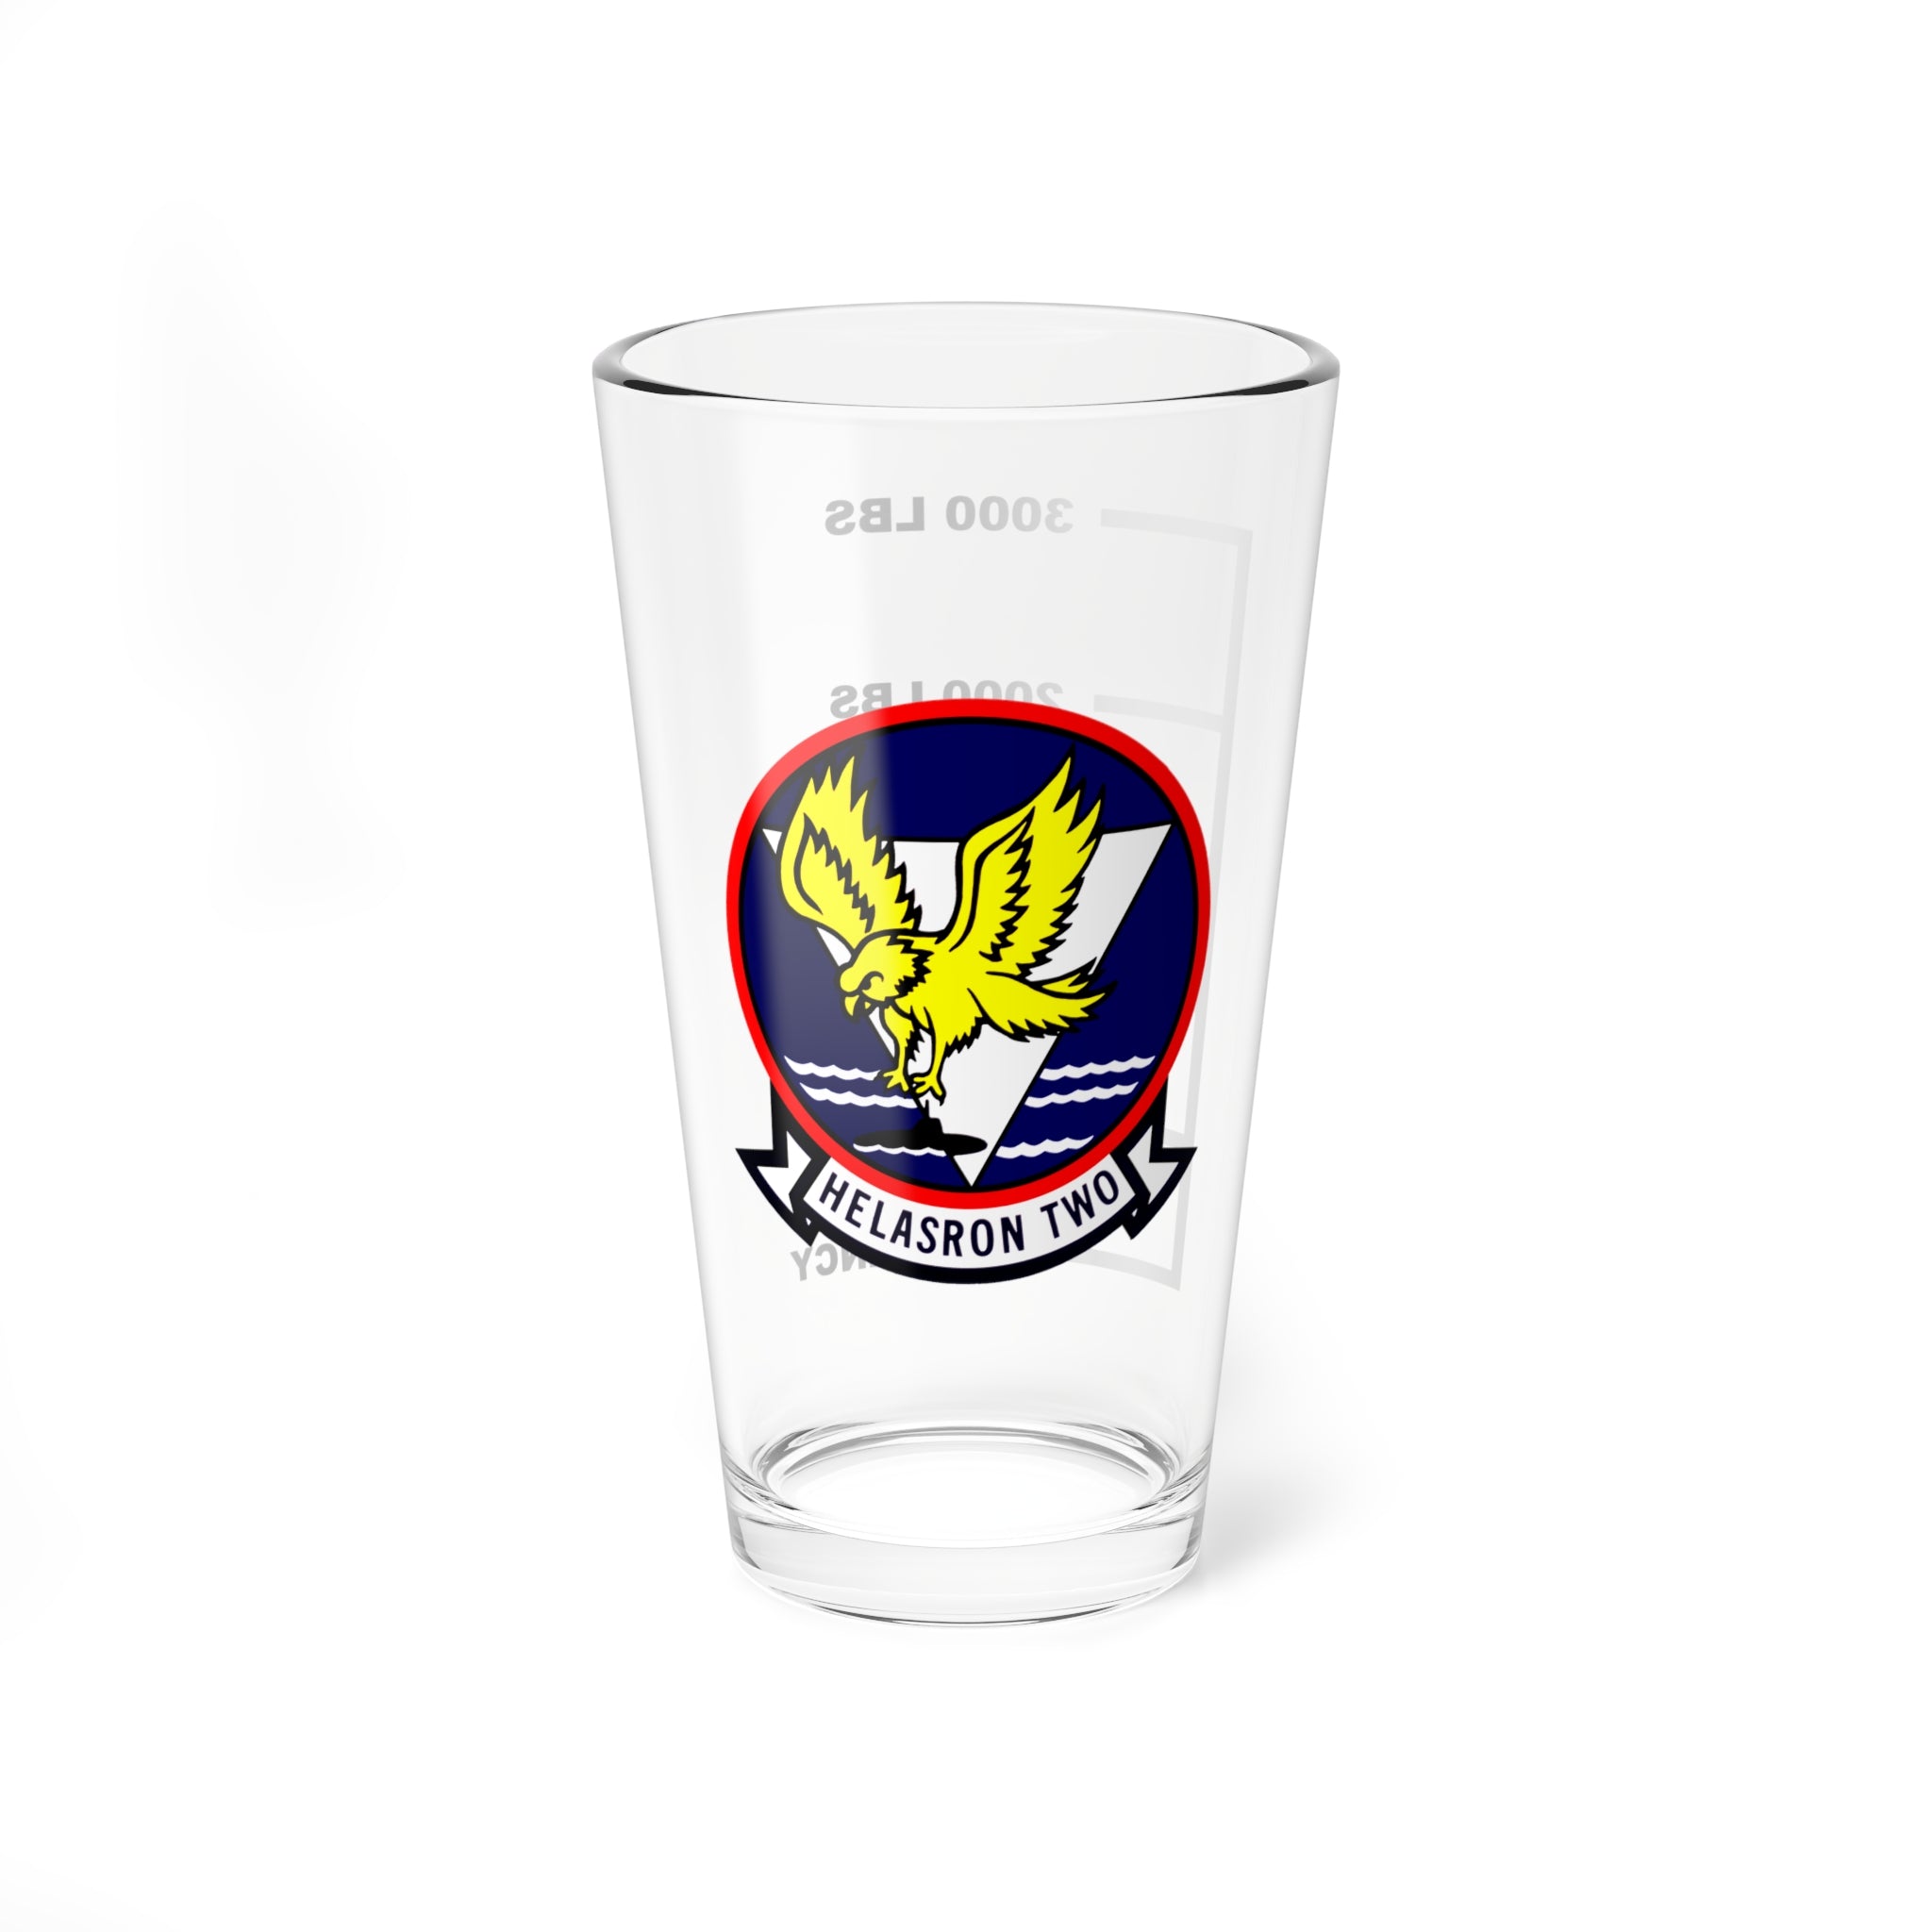 HS-2 "World Famous Golden Falcons" Fuel Low Pint Glass, Navy Helicopter ASW Squadron flying the SH-60F Seahawk